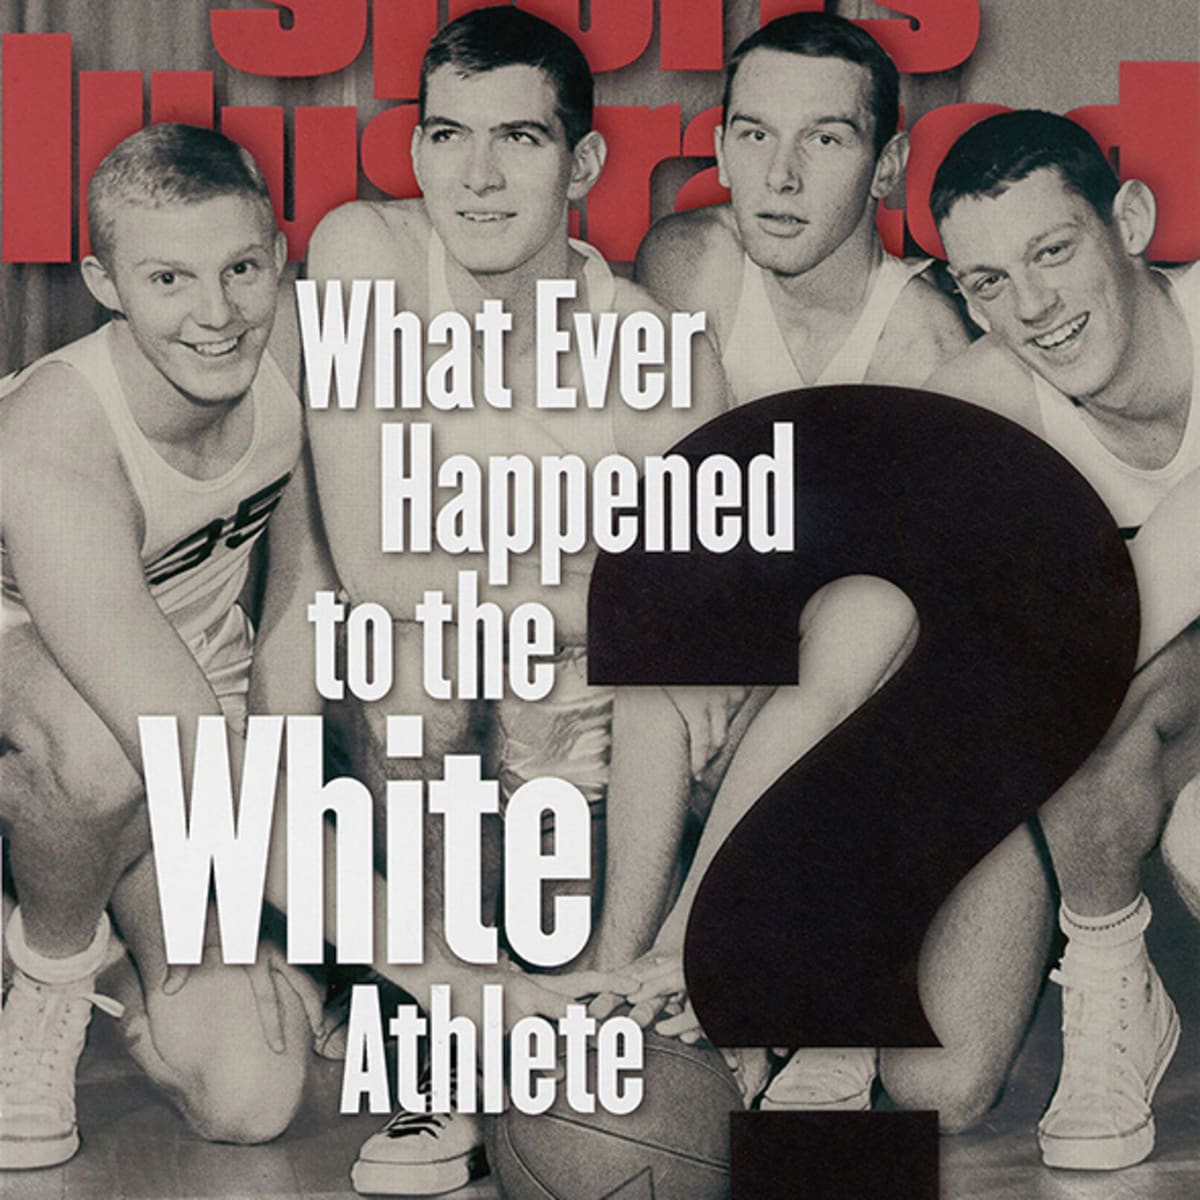 April 28, 1997 Table Of Contents - Sports Illustrated Vault